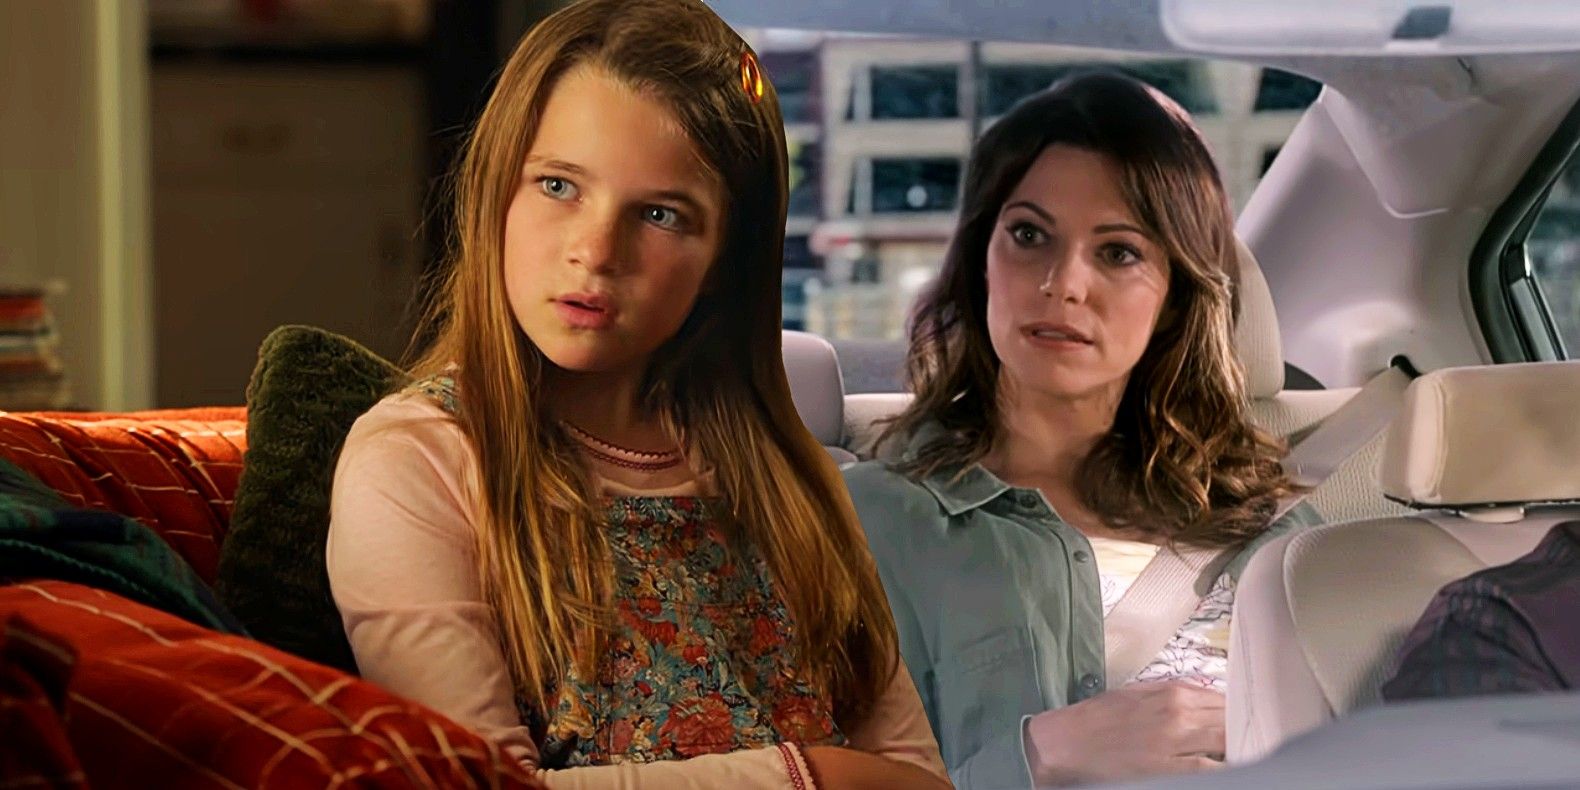 Raegan Revord as Missy in Young Sheldon and Courtney Henggeler is Missy Cooper in The Big Bang Theory